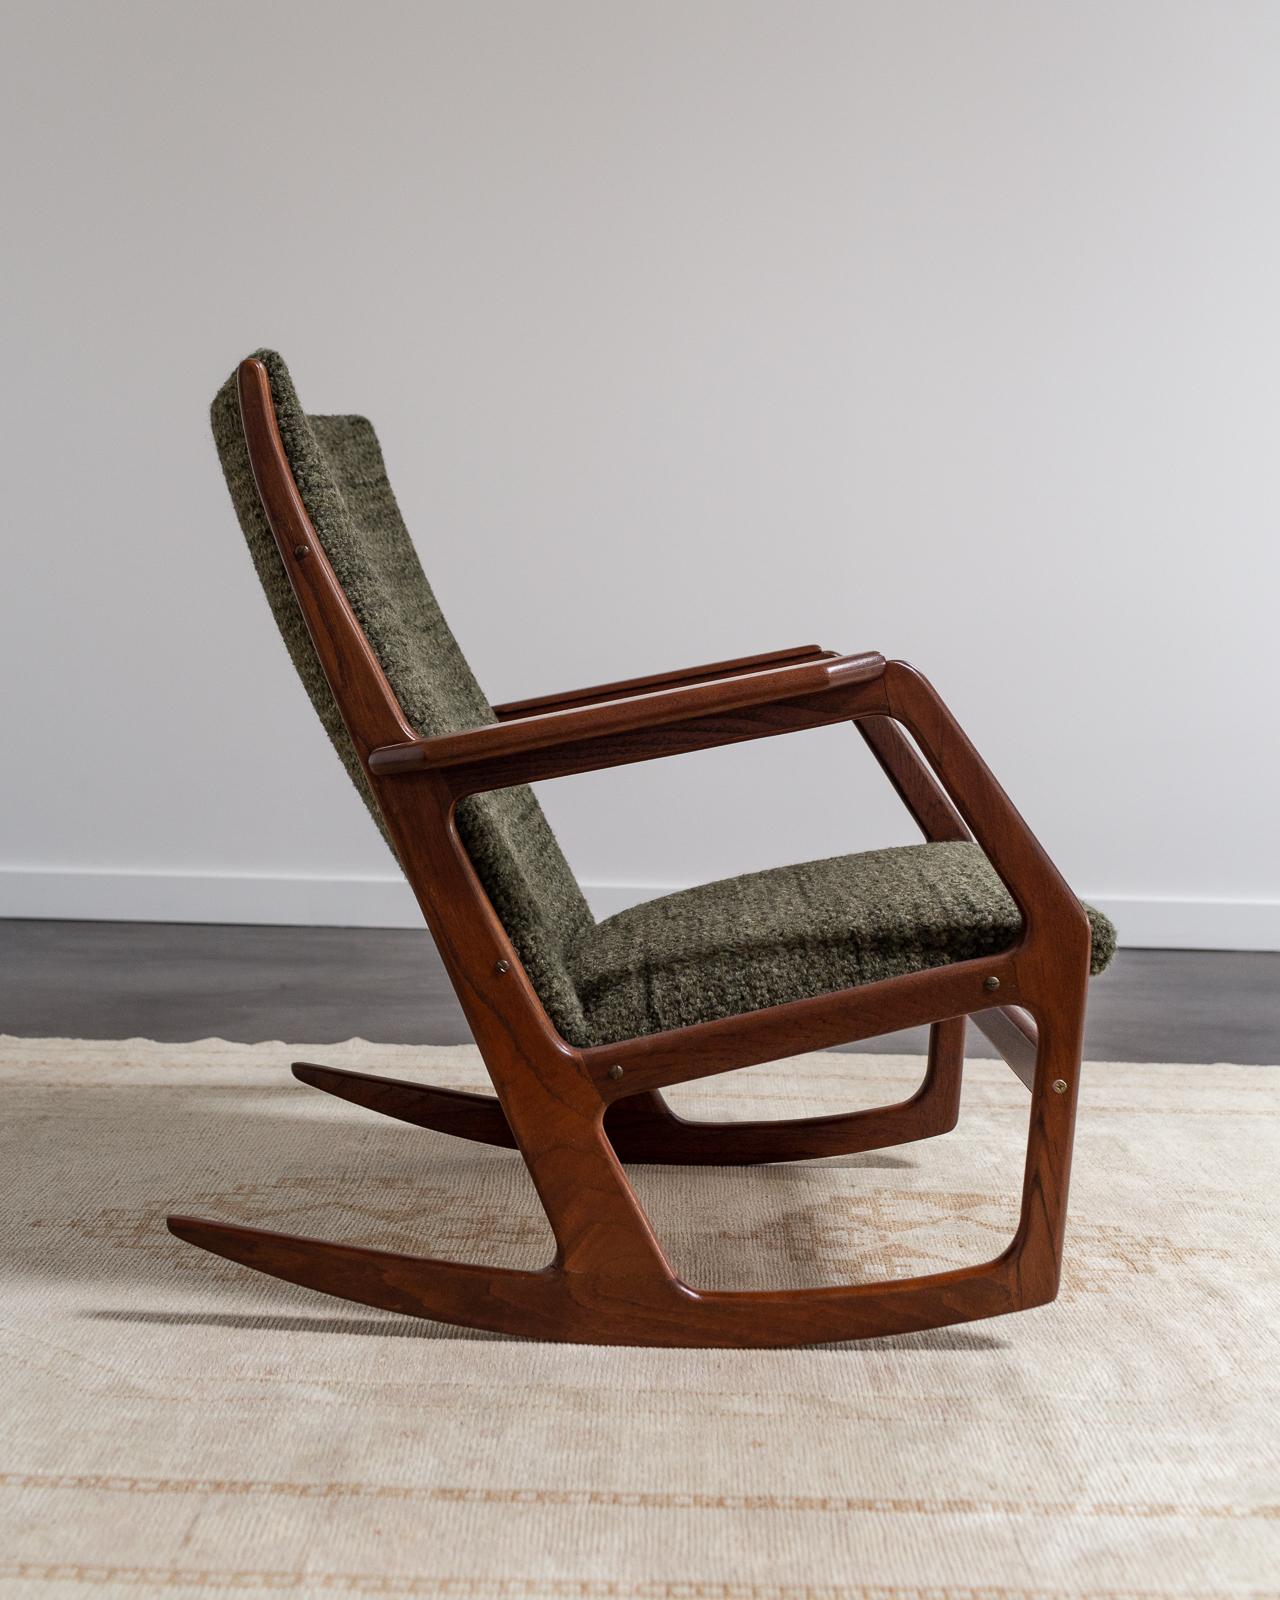 This danish rocking chair by Søren Georg Jensen is constructed with a teak frame and sculpted arms. Newly refinished and reupholstered in a Rosemary Hallgarten Alpaca.